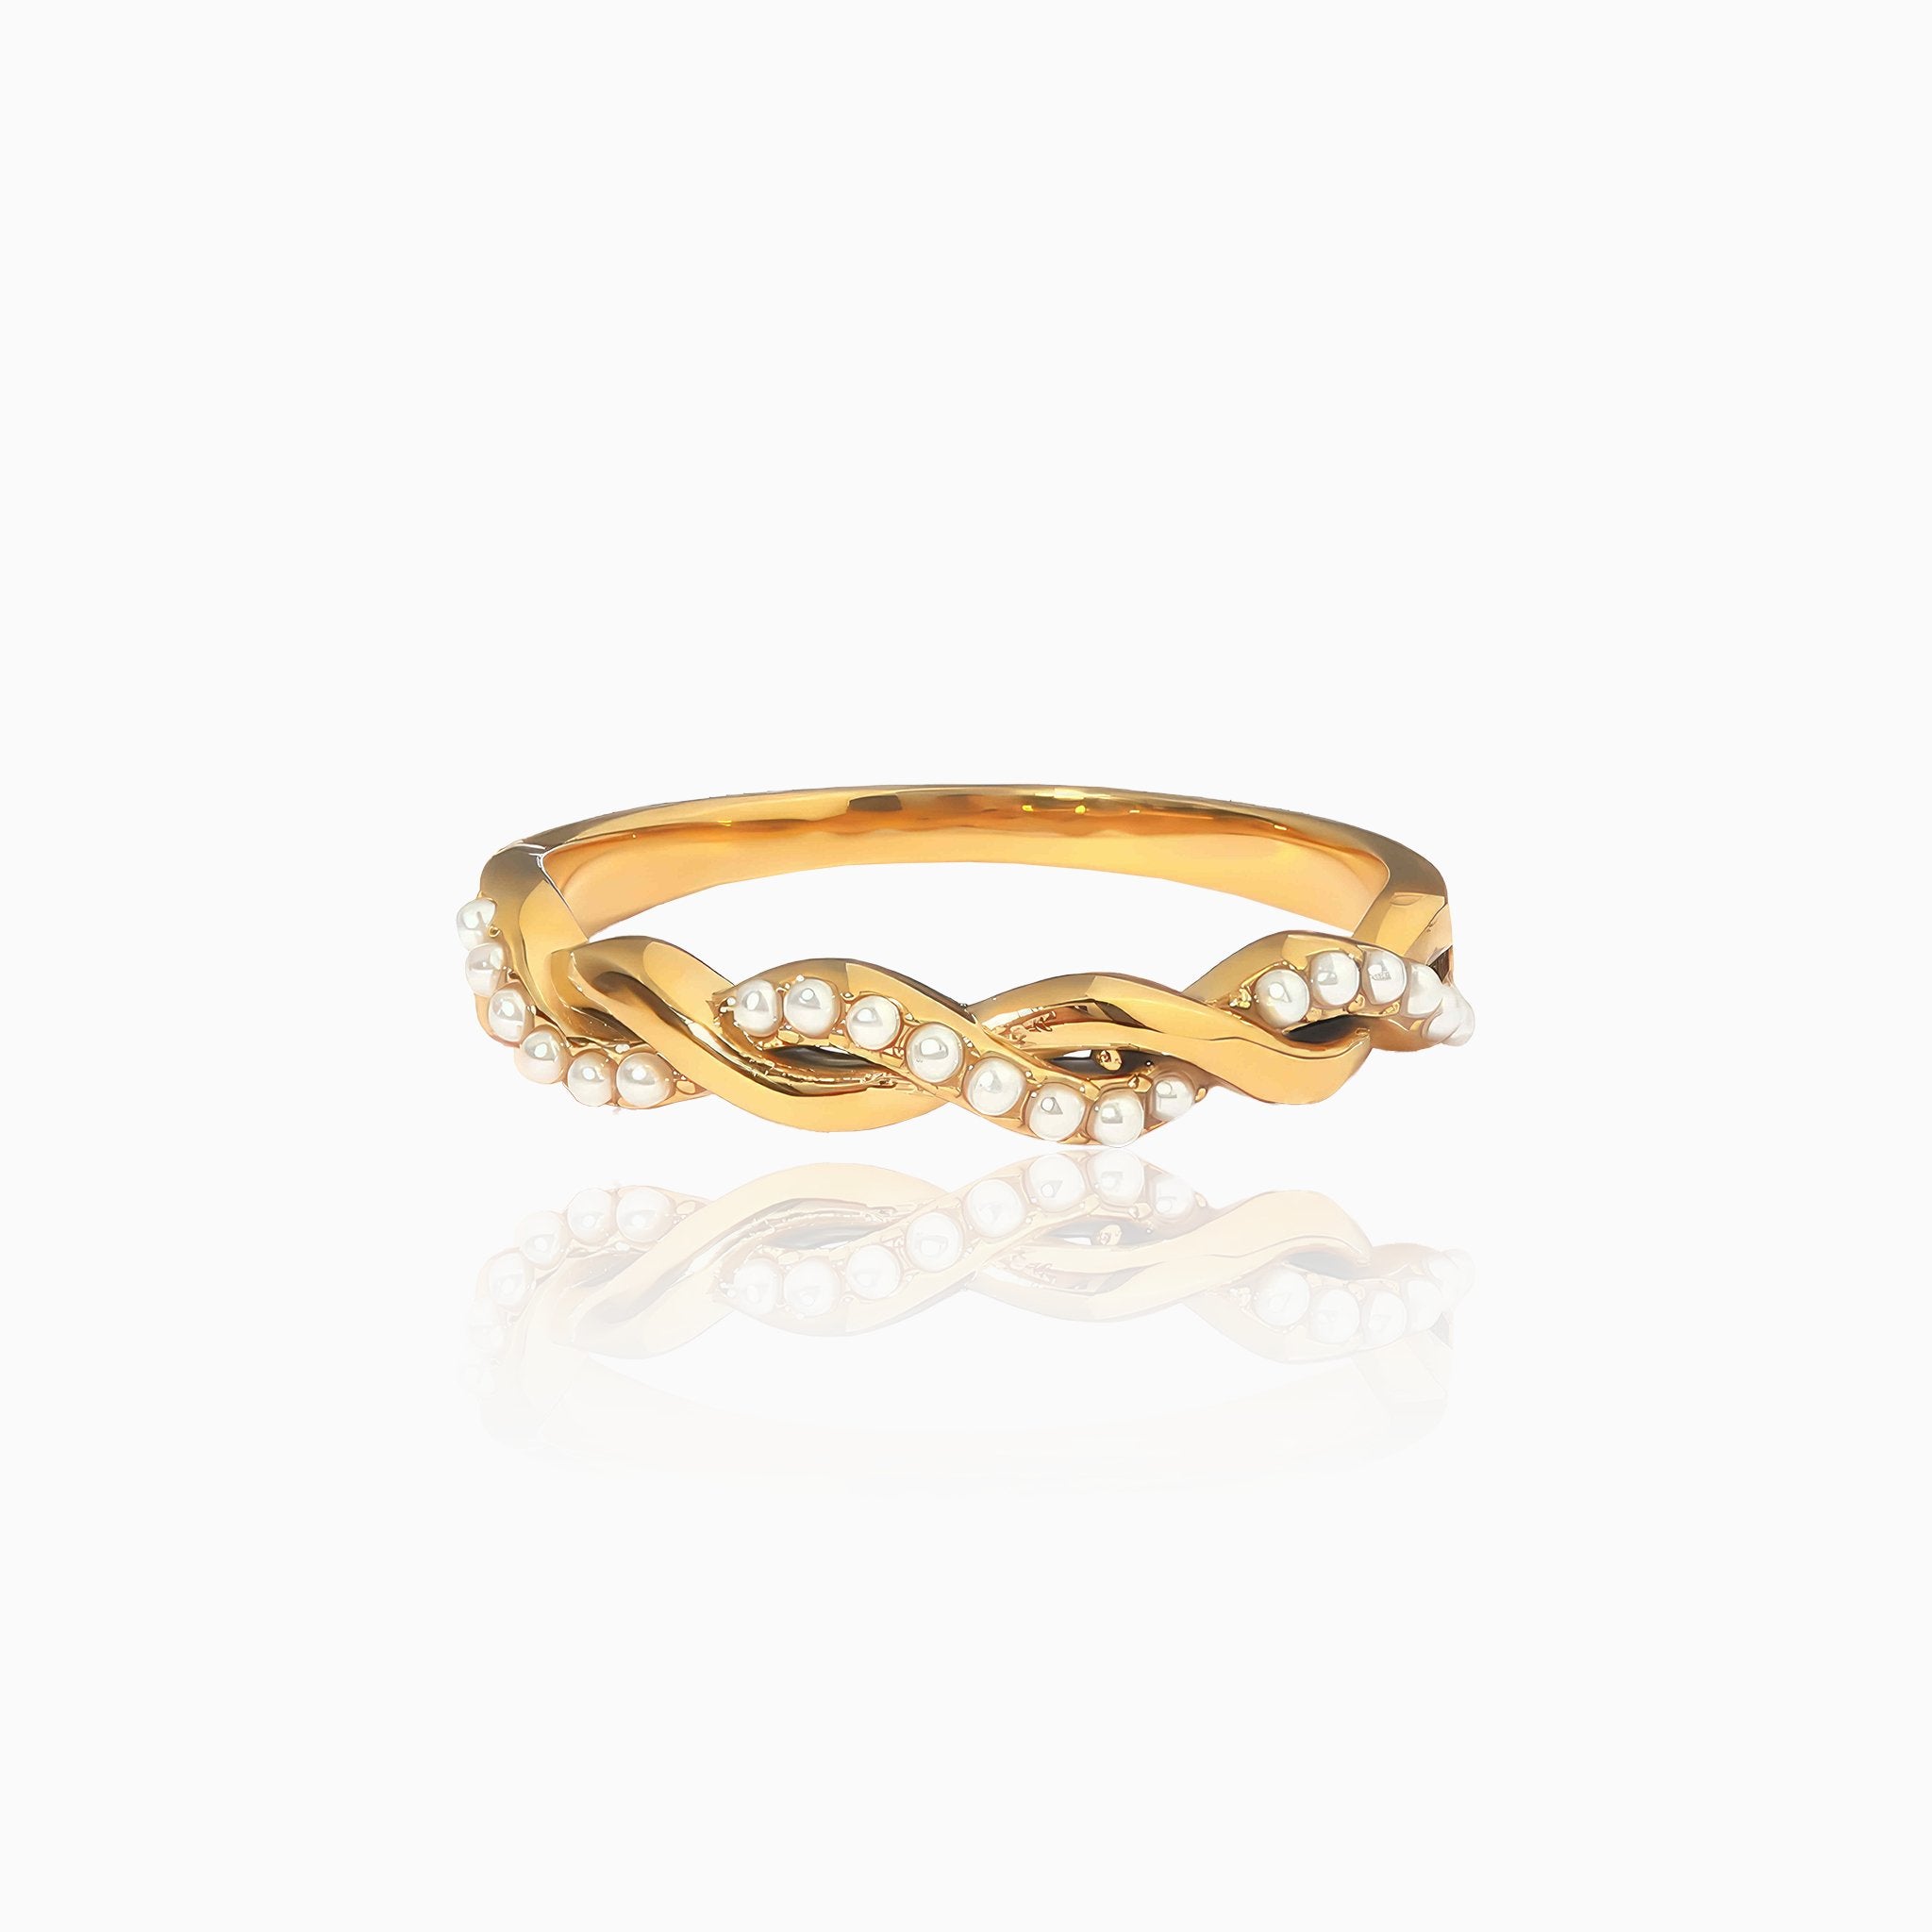 Braided Twist Geometric Ring - Nobbier - Ring - 18K Gold And Titanium PVD Coated Jewelry